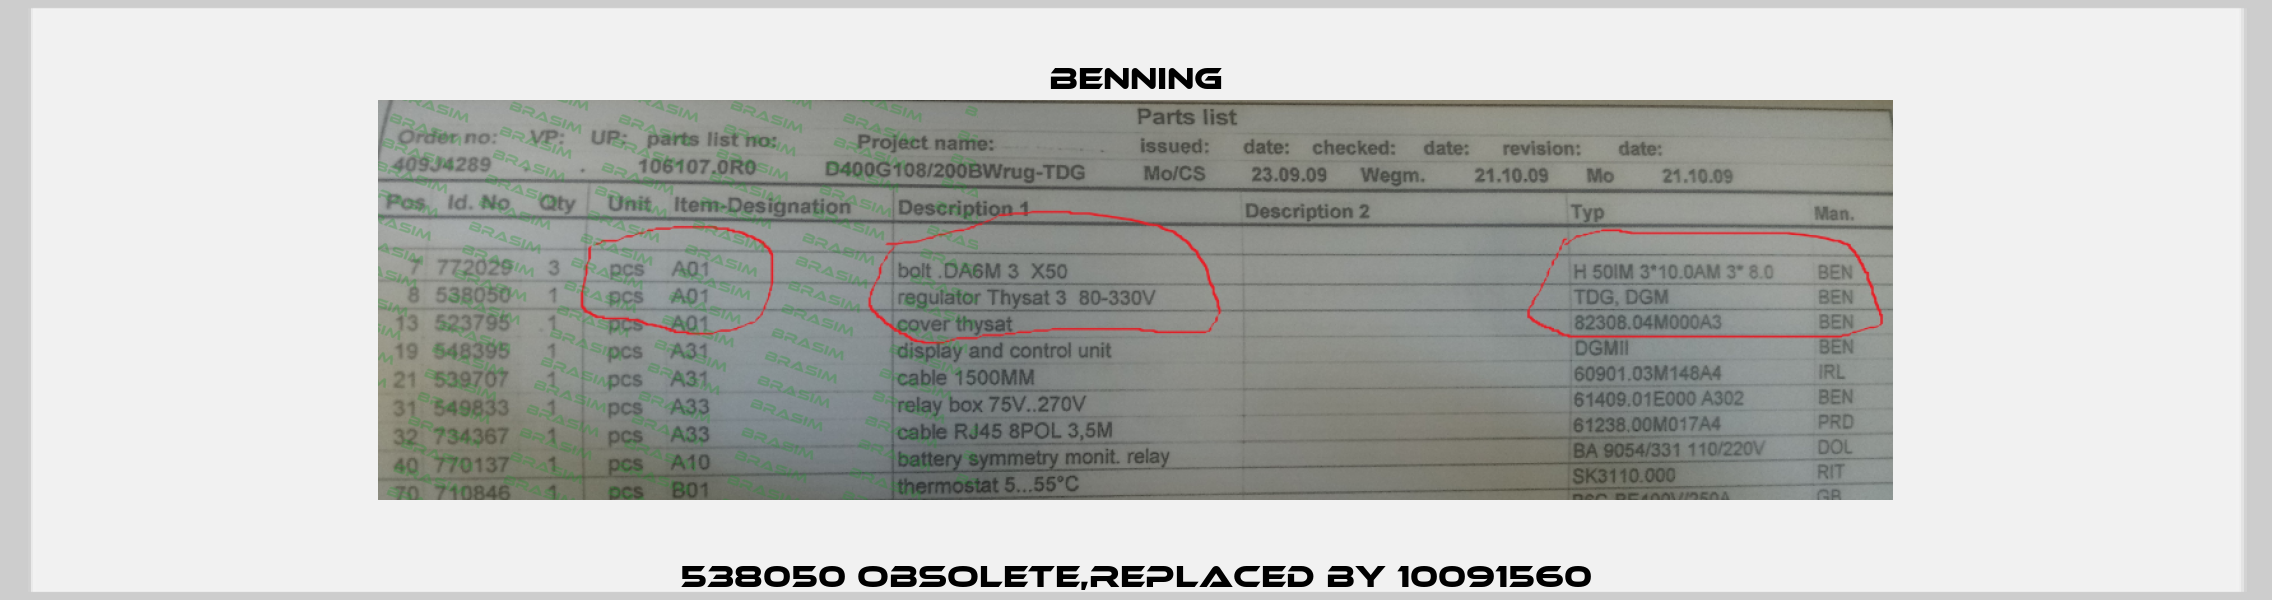 538050 obsolete,replaced by 10091560 Benning